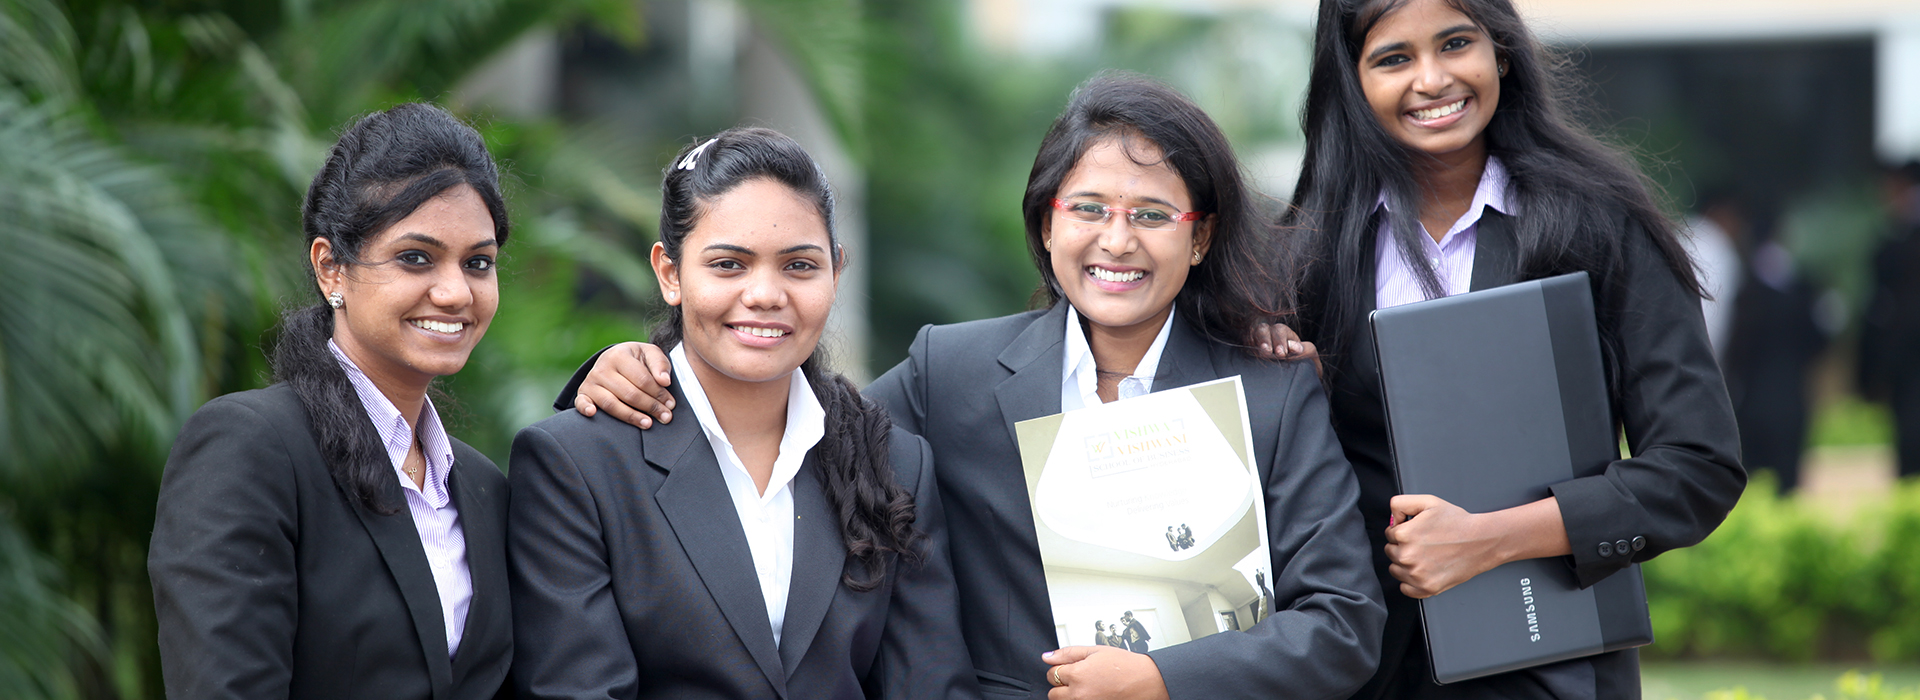 PGDM courses in Hyderabad, India